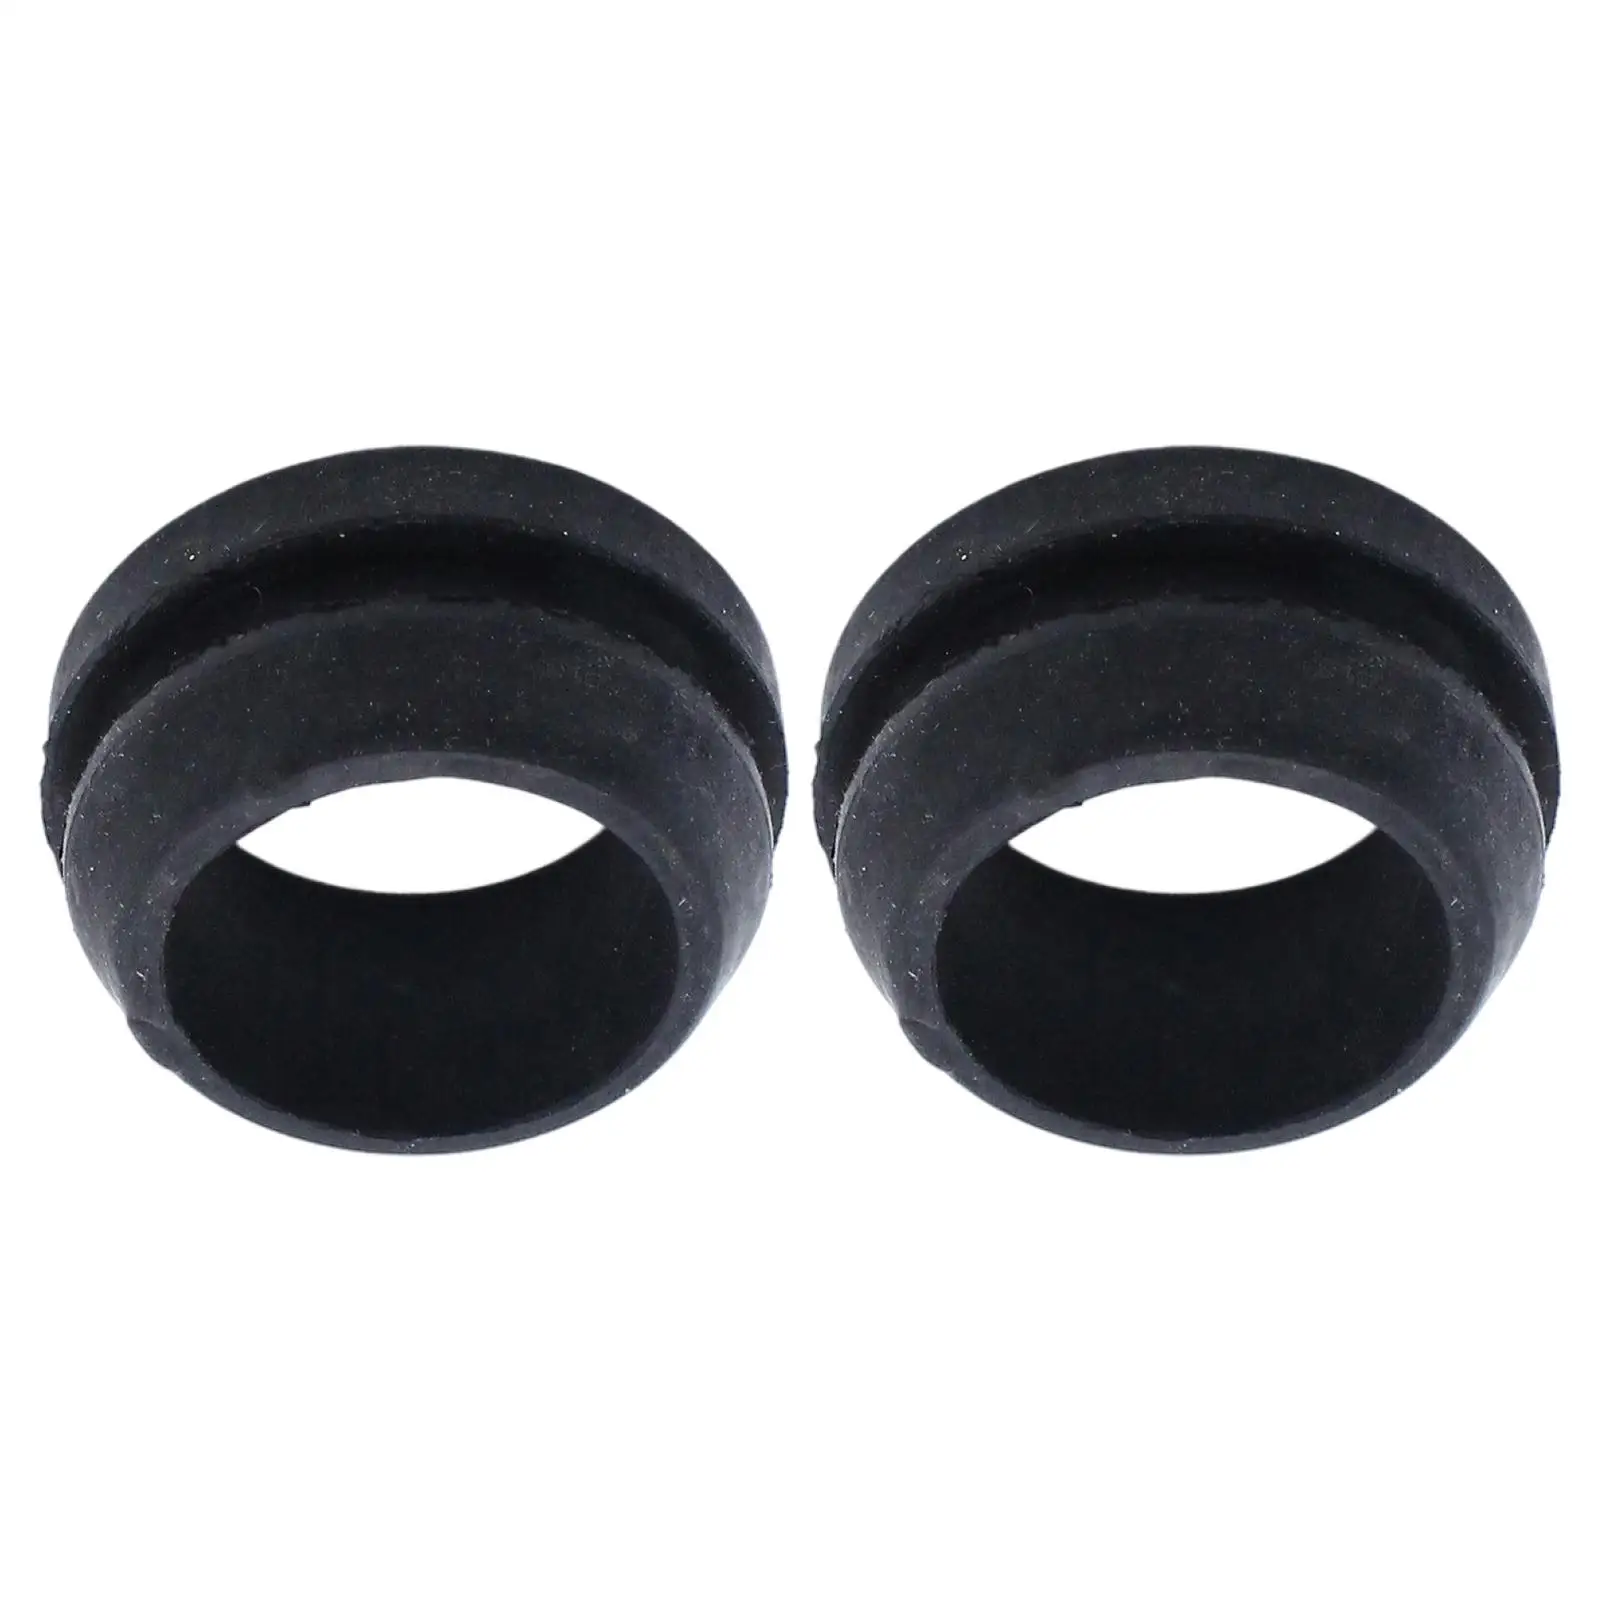 2x High Temp Rubber Breather Grommets for Steel Valve Cover 4880 4998 1/4